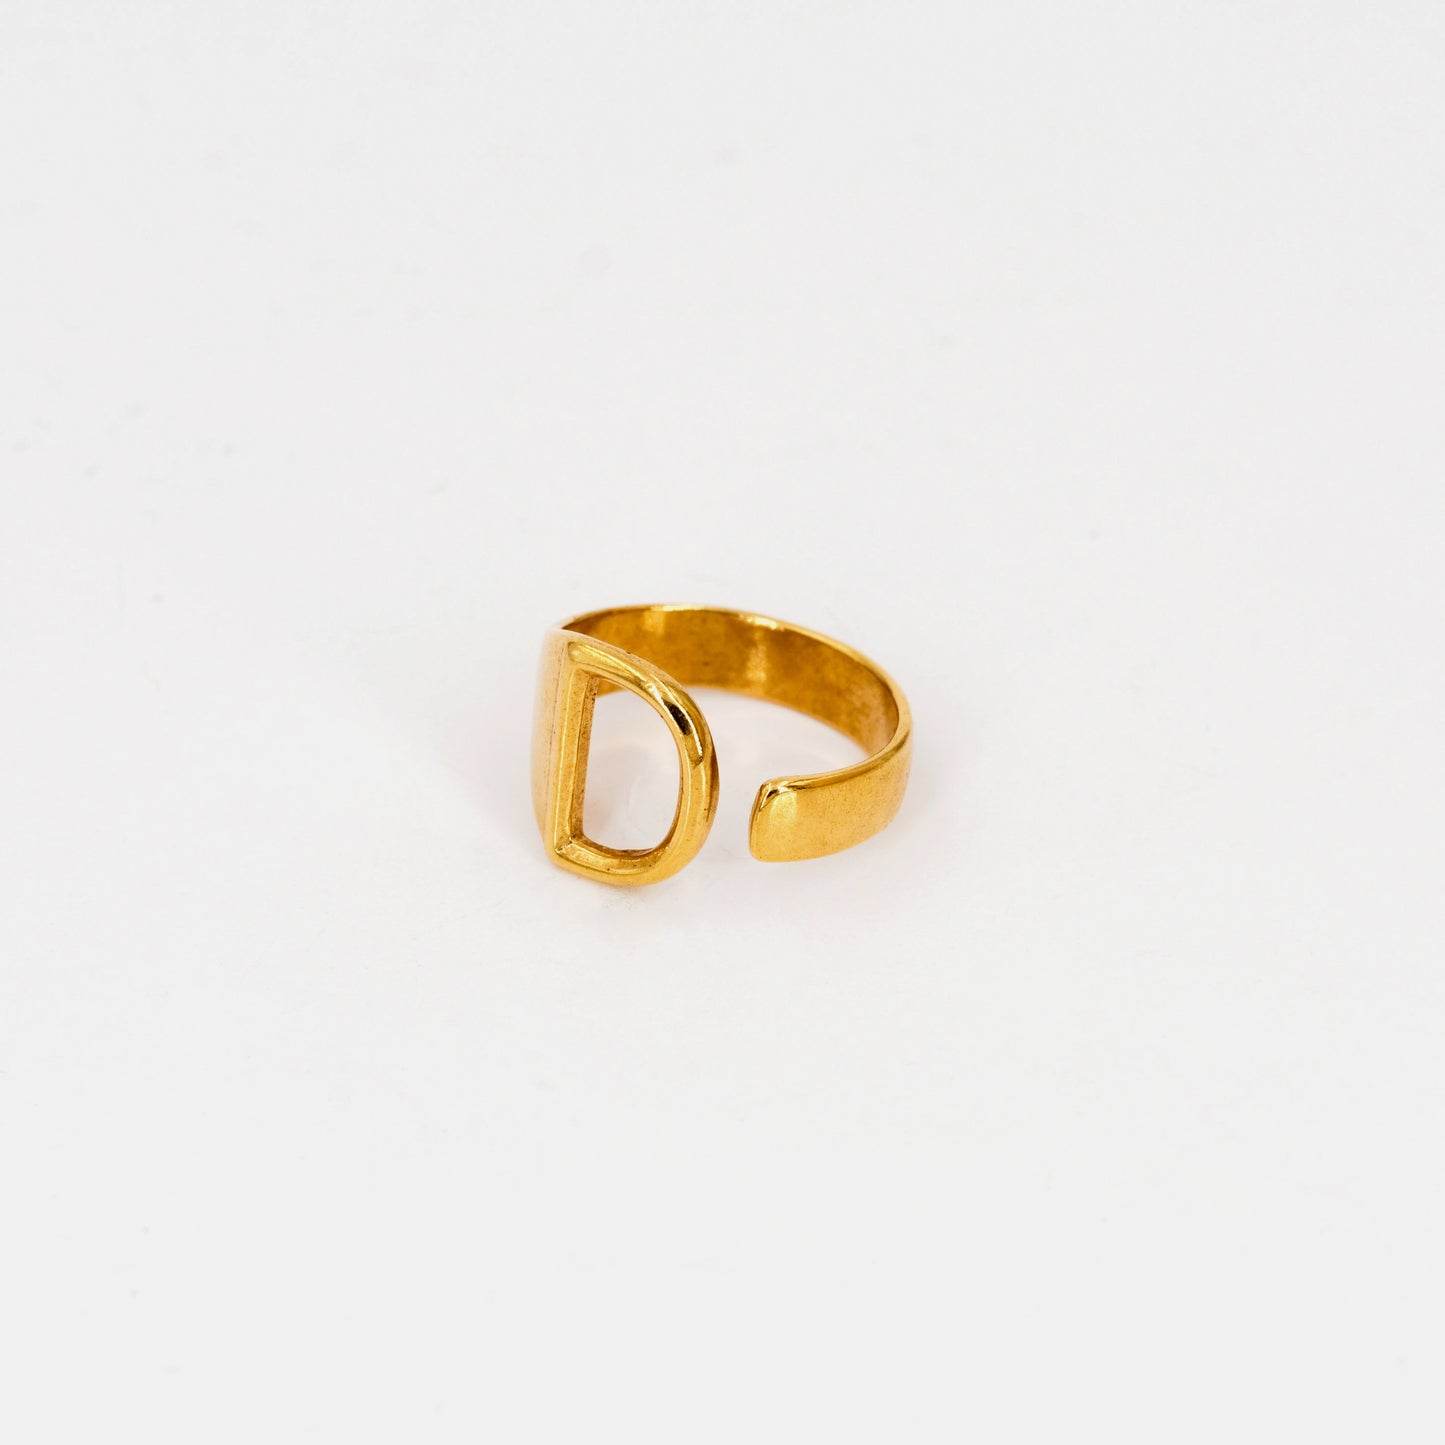 "Character" adjustable ring